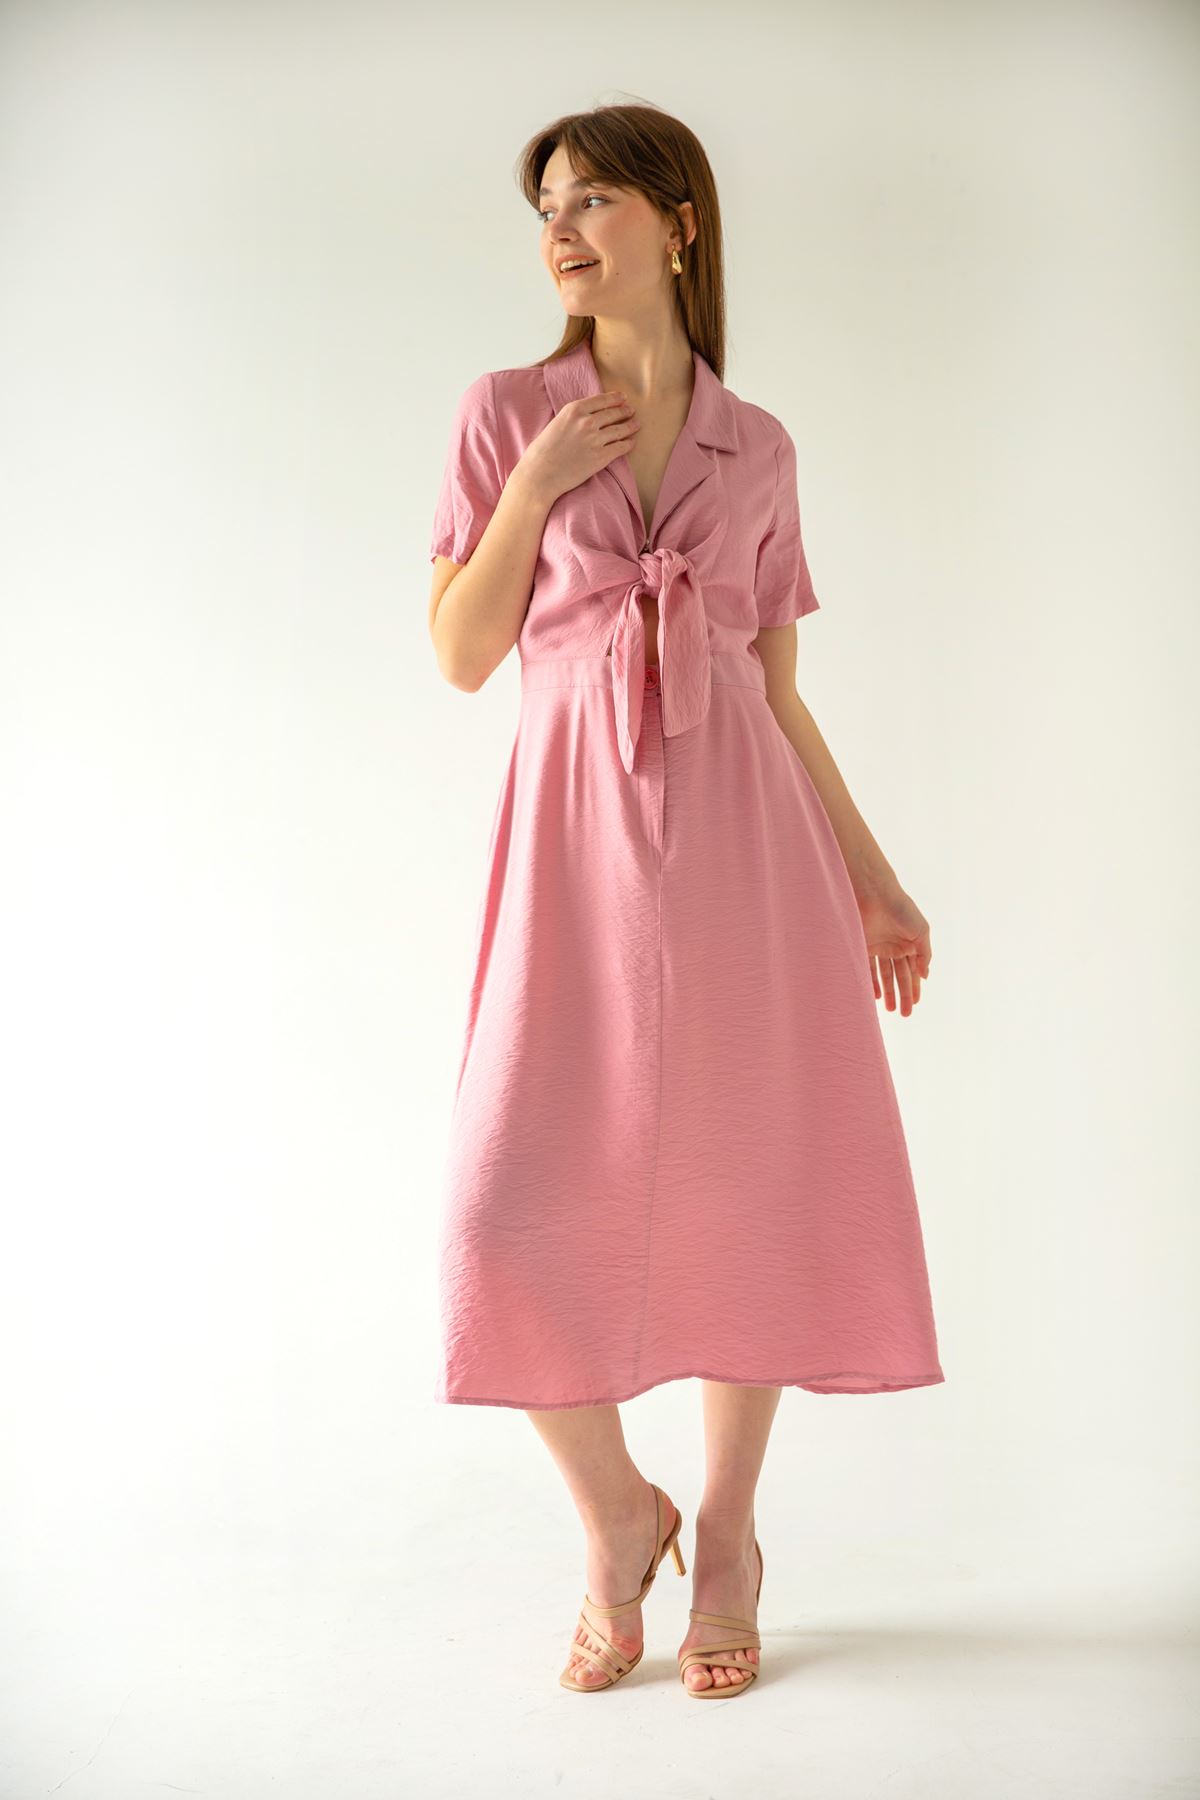 Base Quality Fabric Revere Collar Tied Long Dress - Rose 